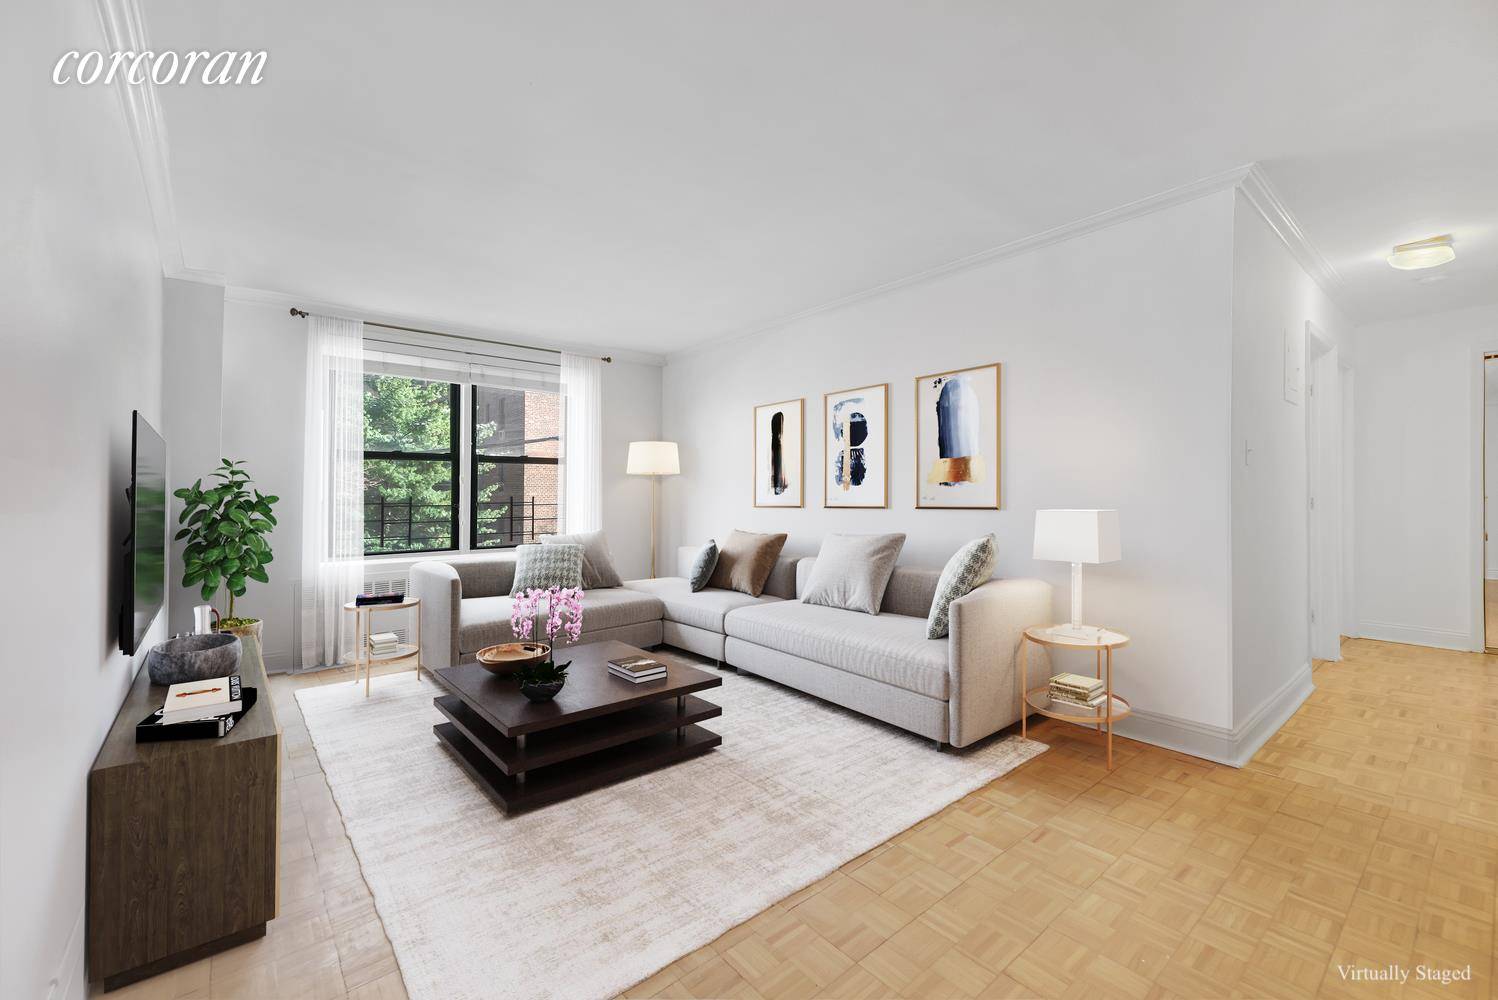 Welcome home to this beautiful 2 Bedrooms, 1 Bathroom CONDO, flooded with natural light in the most desirable condo building in Jackson Heights.